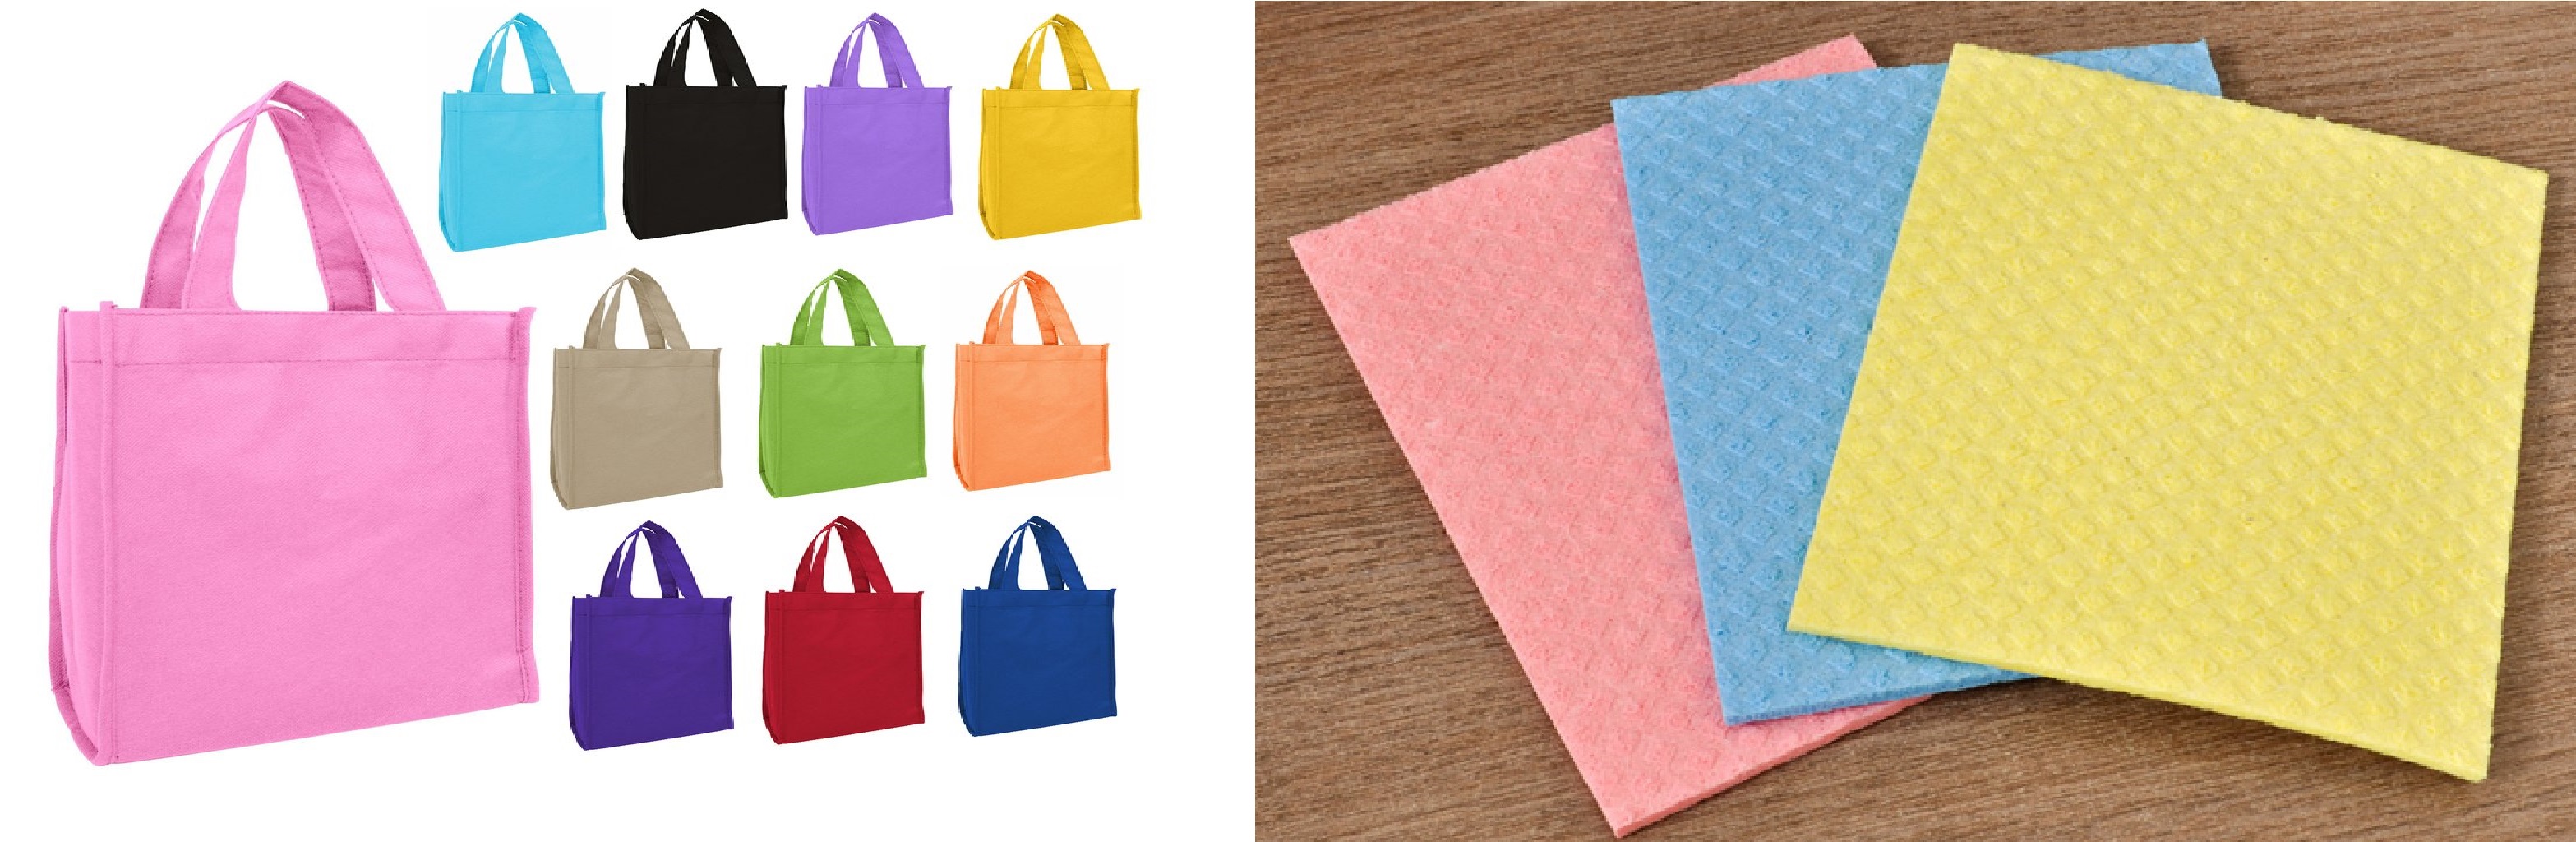 Nonwoven fabric bags and cloths